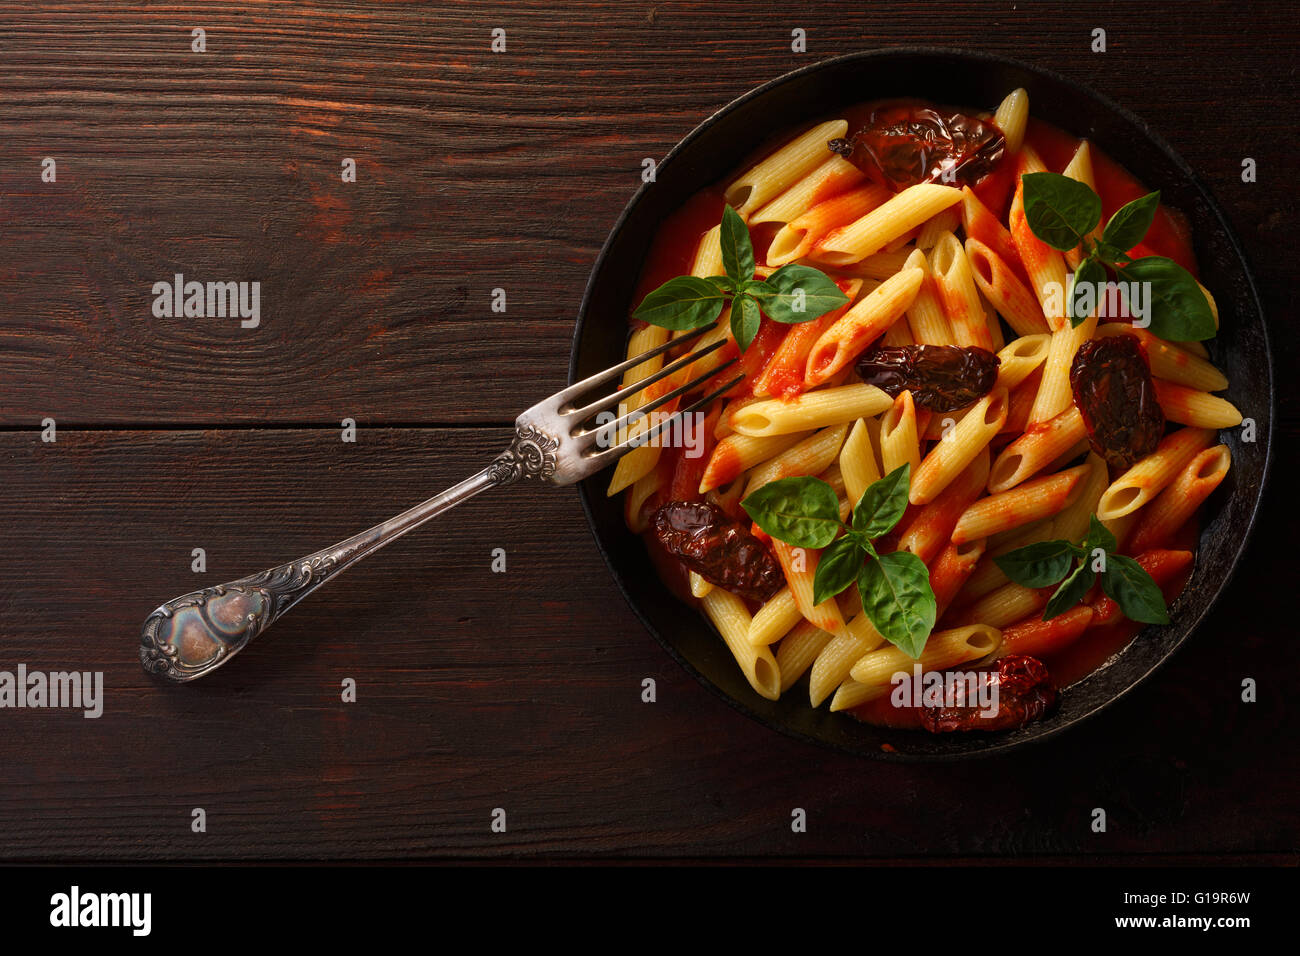 Pasta penne rigate with tomato sauce and basil leaves on wooden table. Top view, flat lay Stock Photo